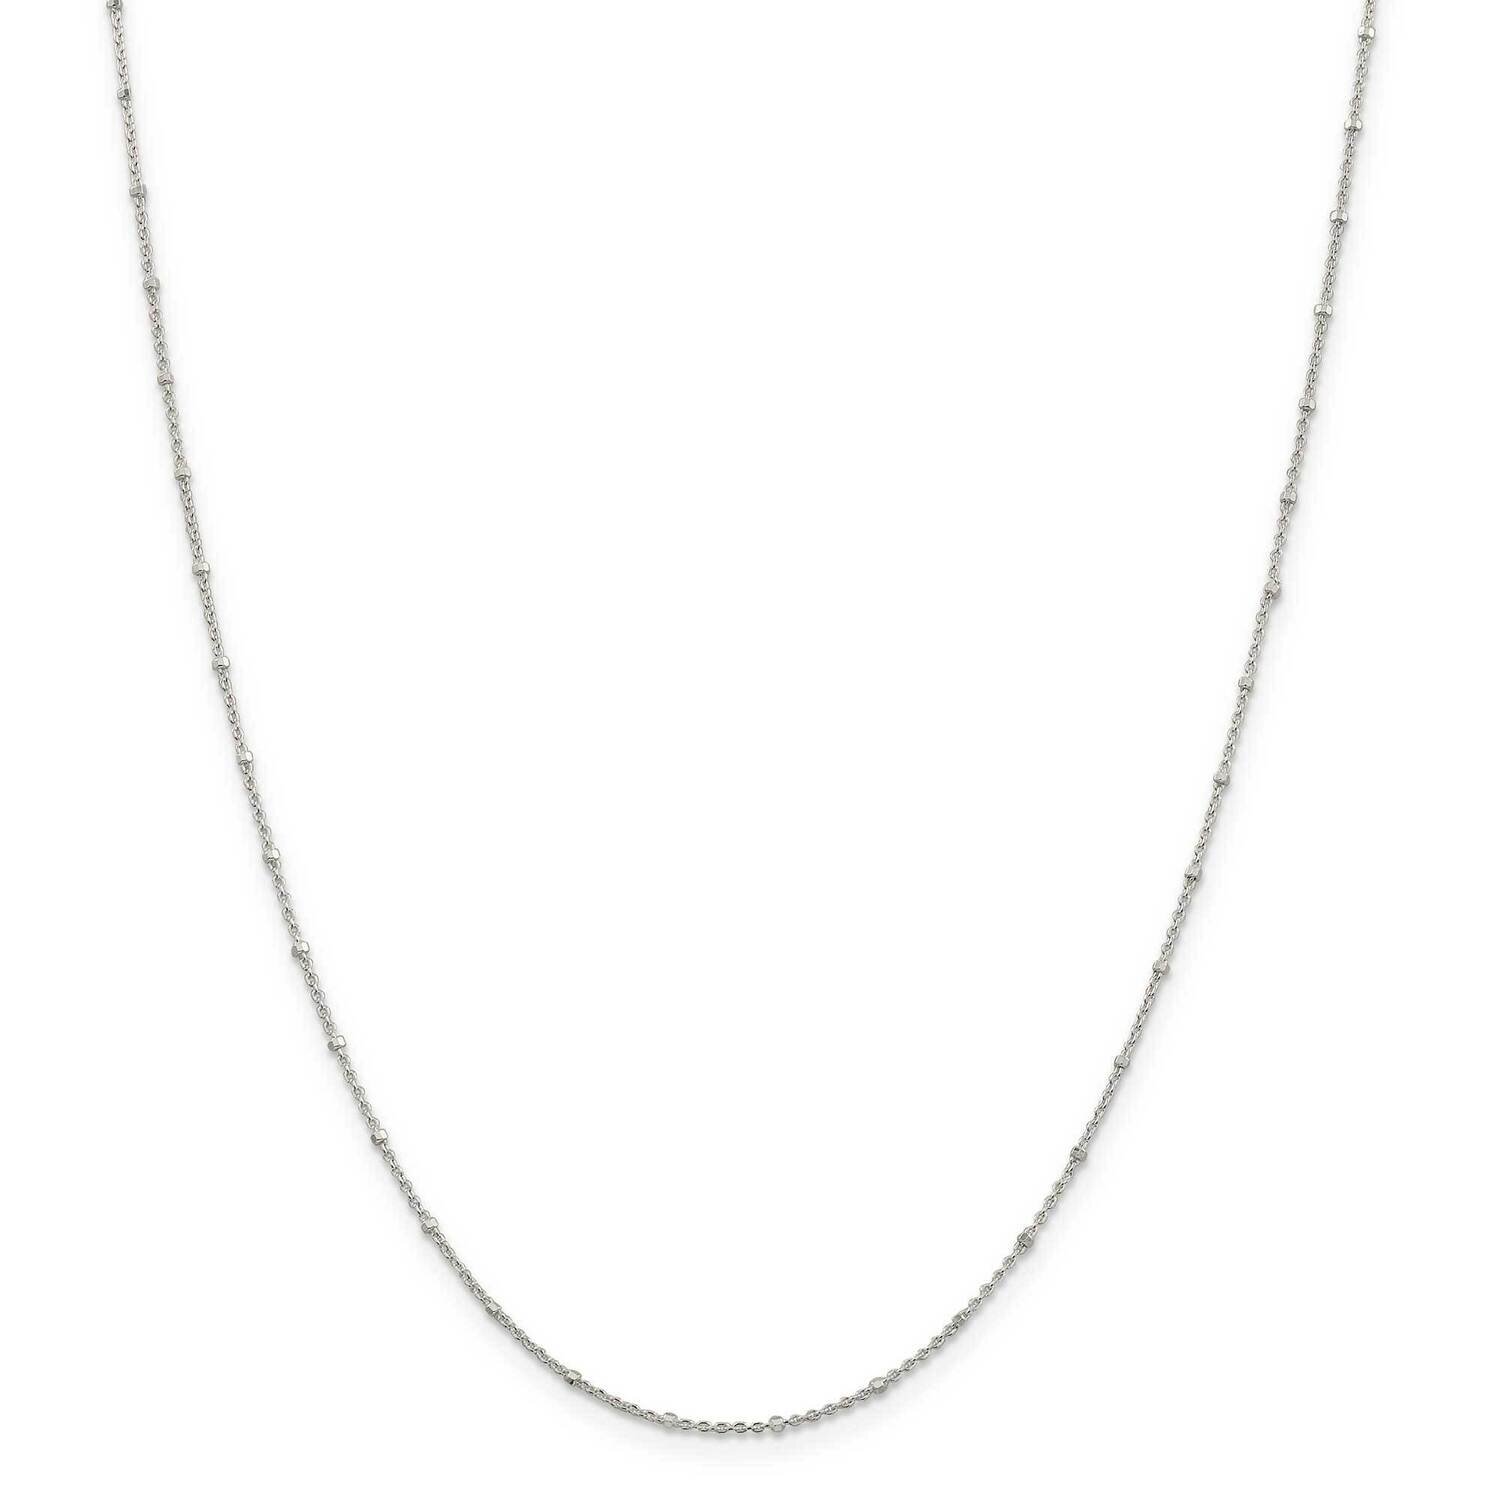 1.25mm Rolo with Beads Chain with 2 Inch Extender 18 Inch Sterling Silver QFC163E-18